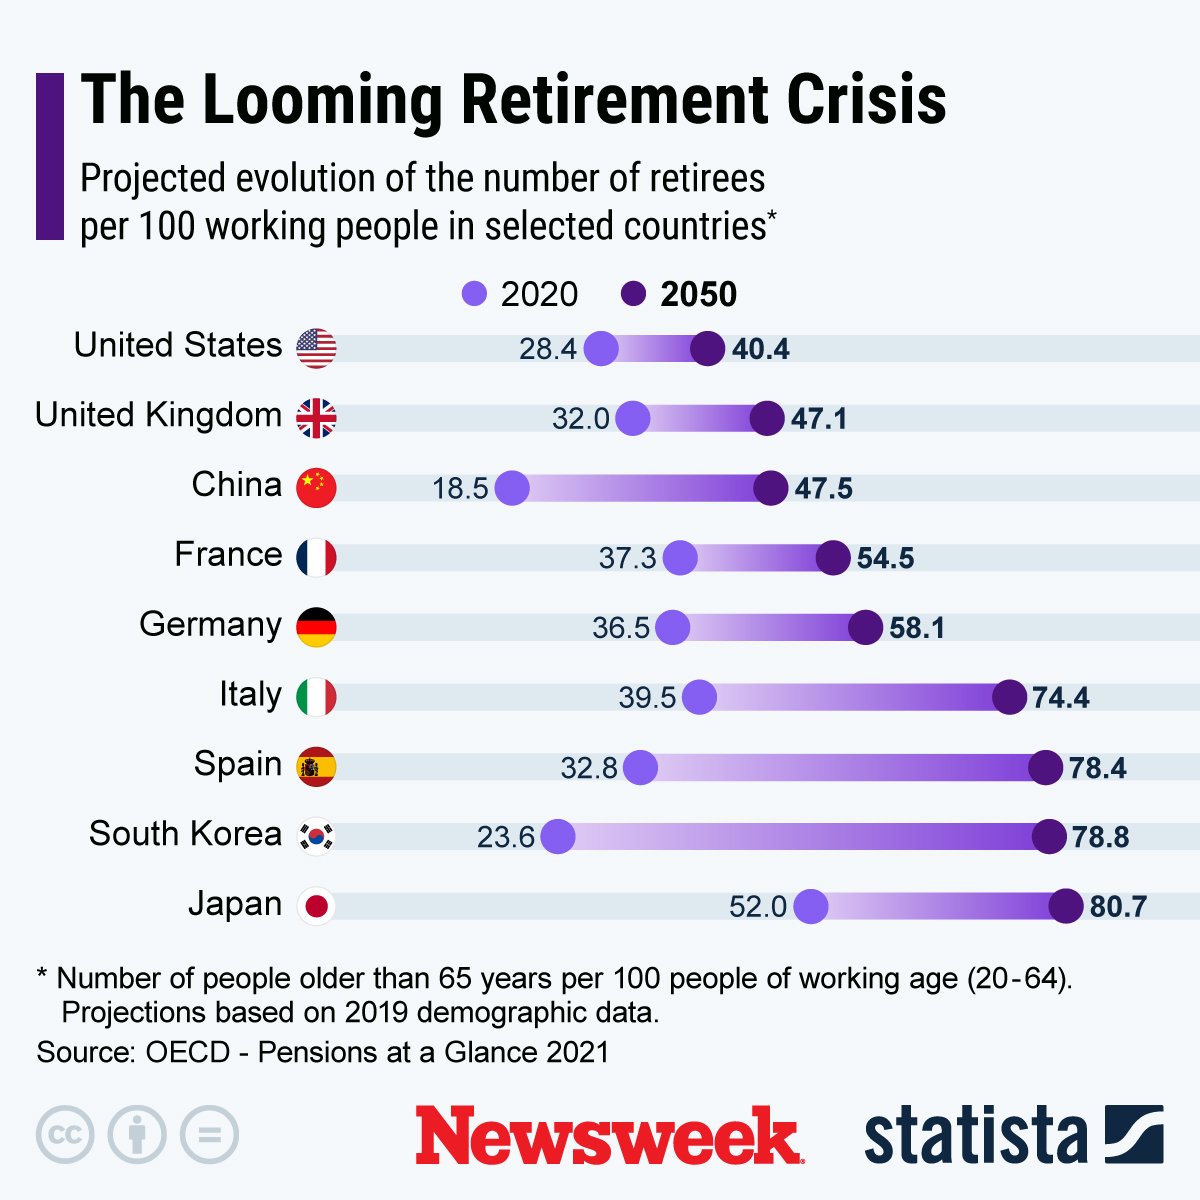 The Looming Retirement Crisis